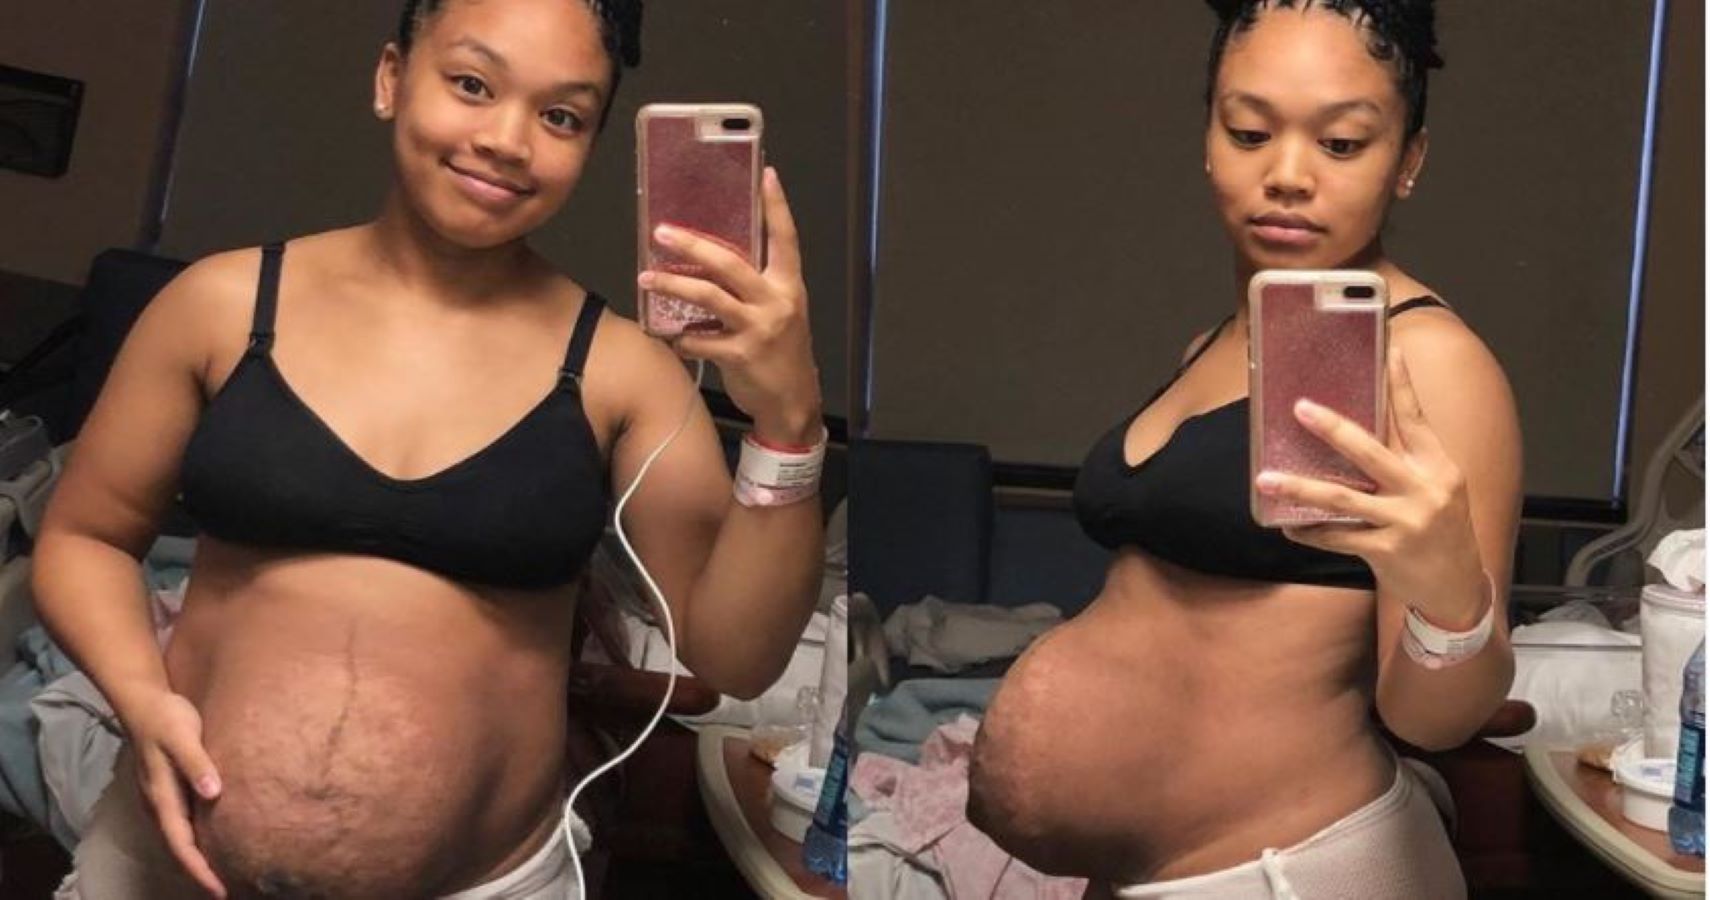 Mom Shares Monthly Postpartum Photos To Show How Women's Bodies Change